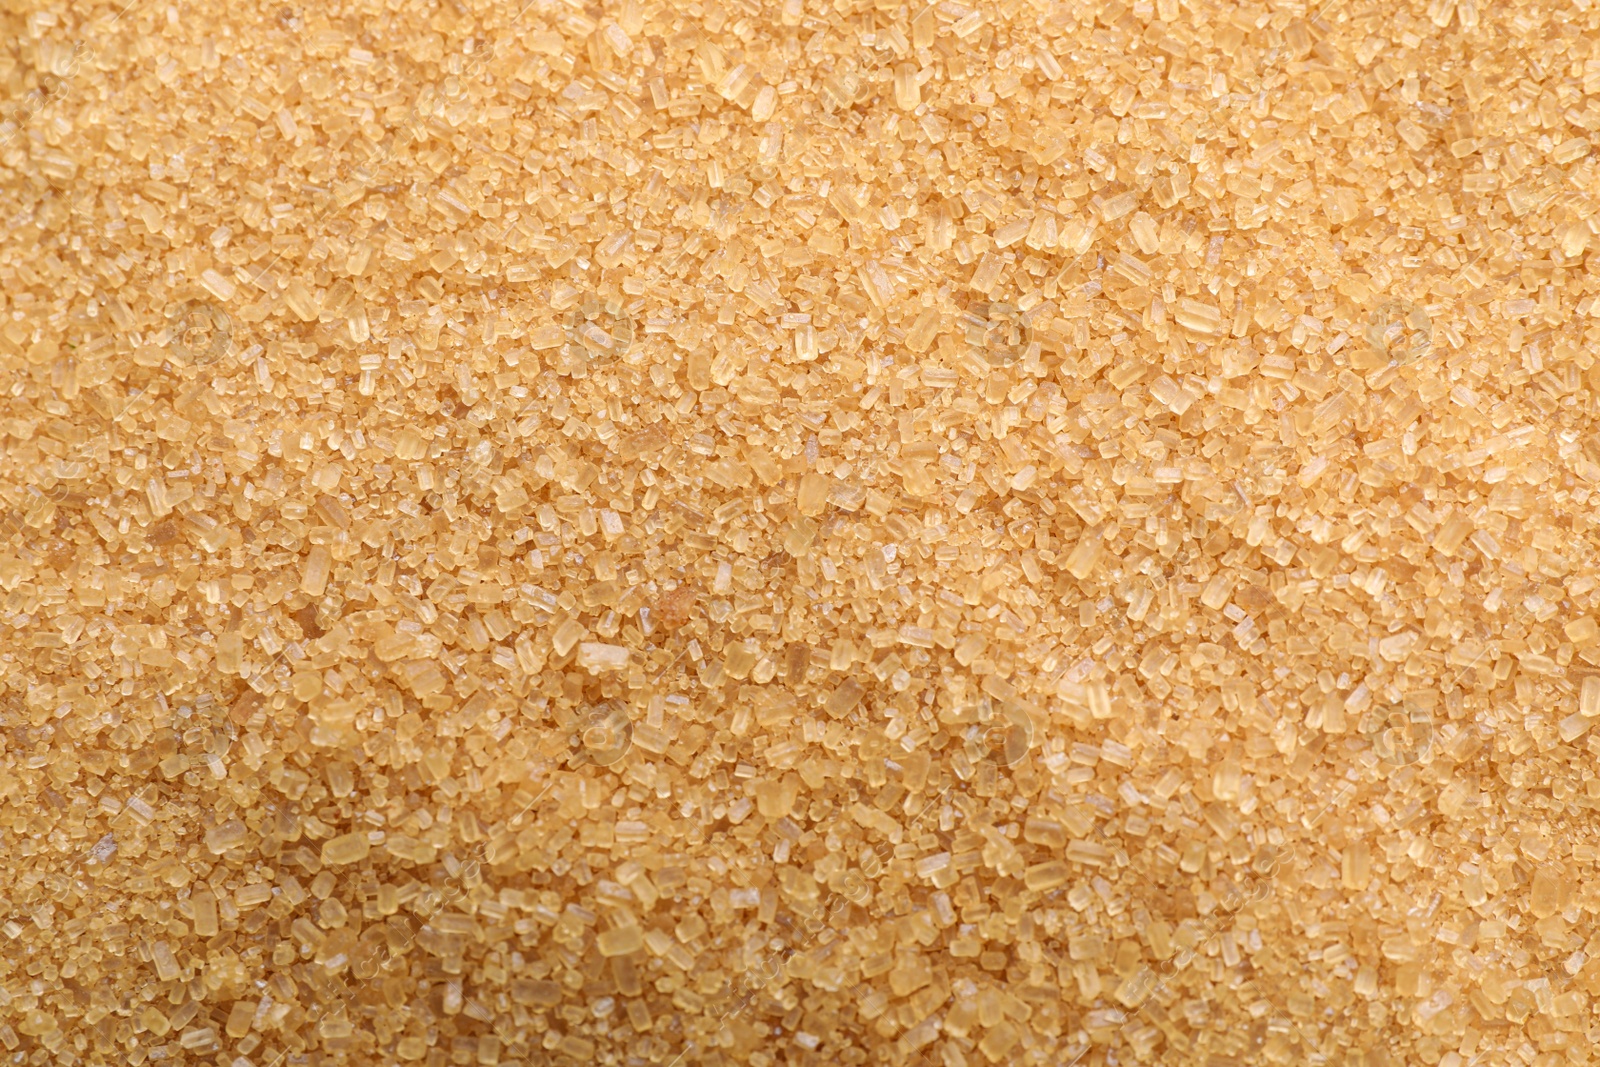 Photo of Pile of brown sugar as background, closeup